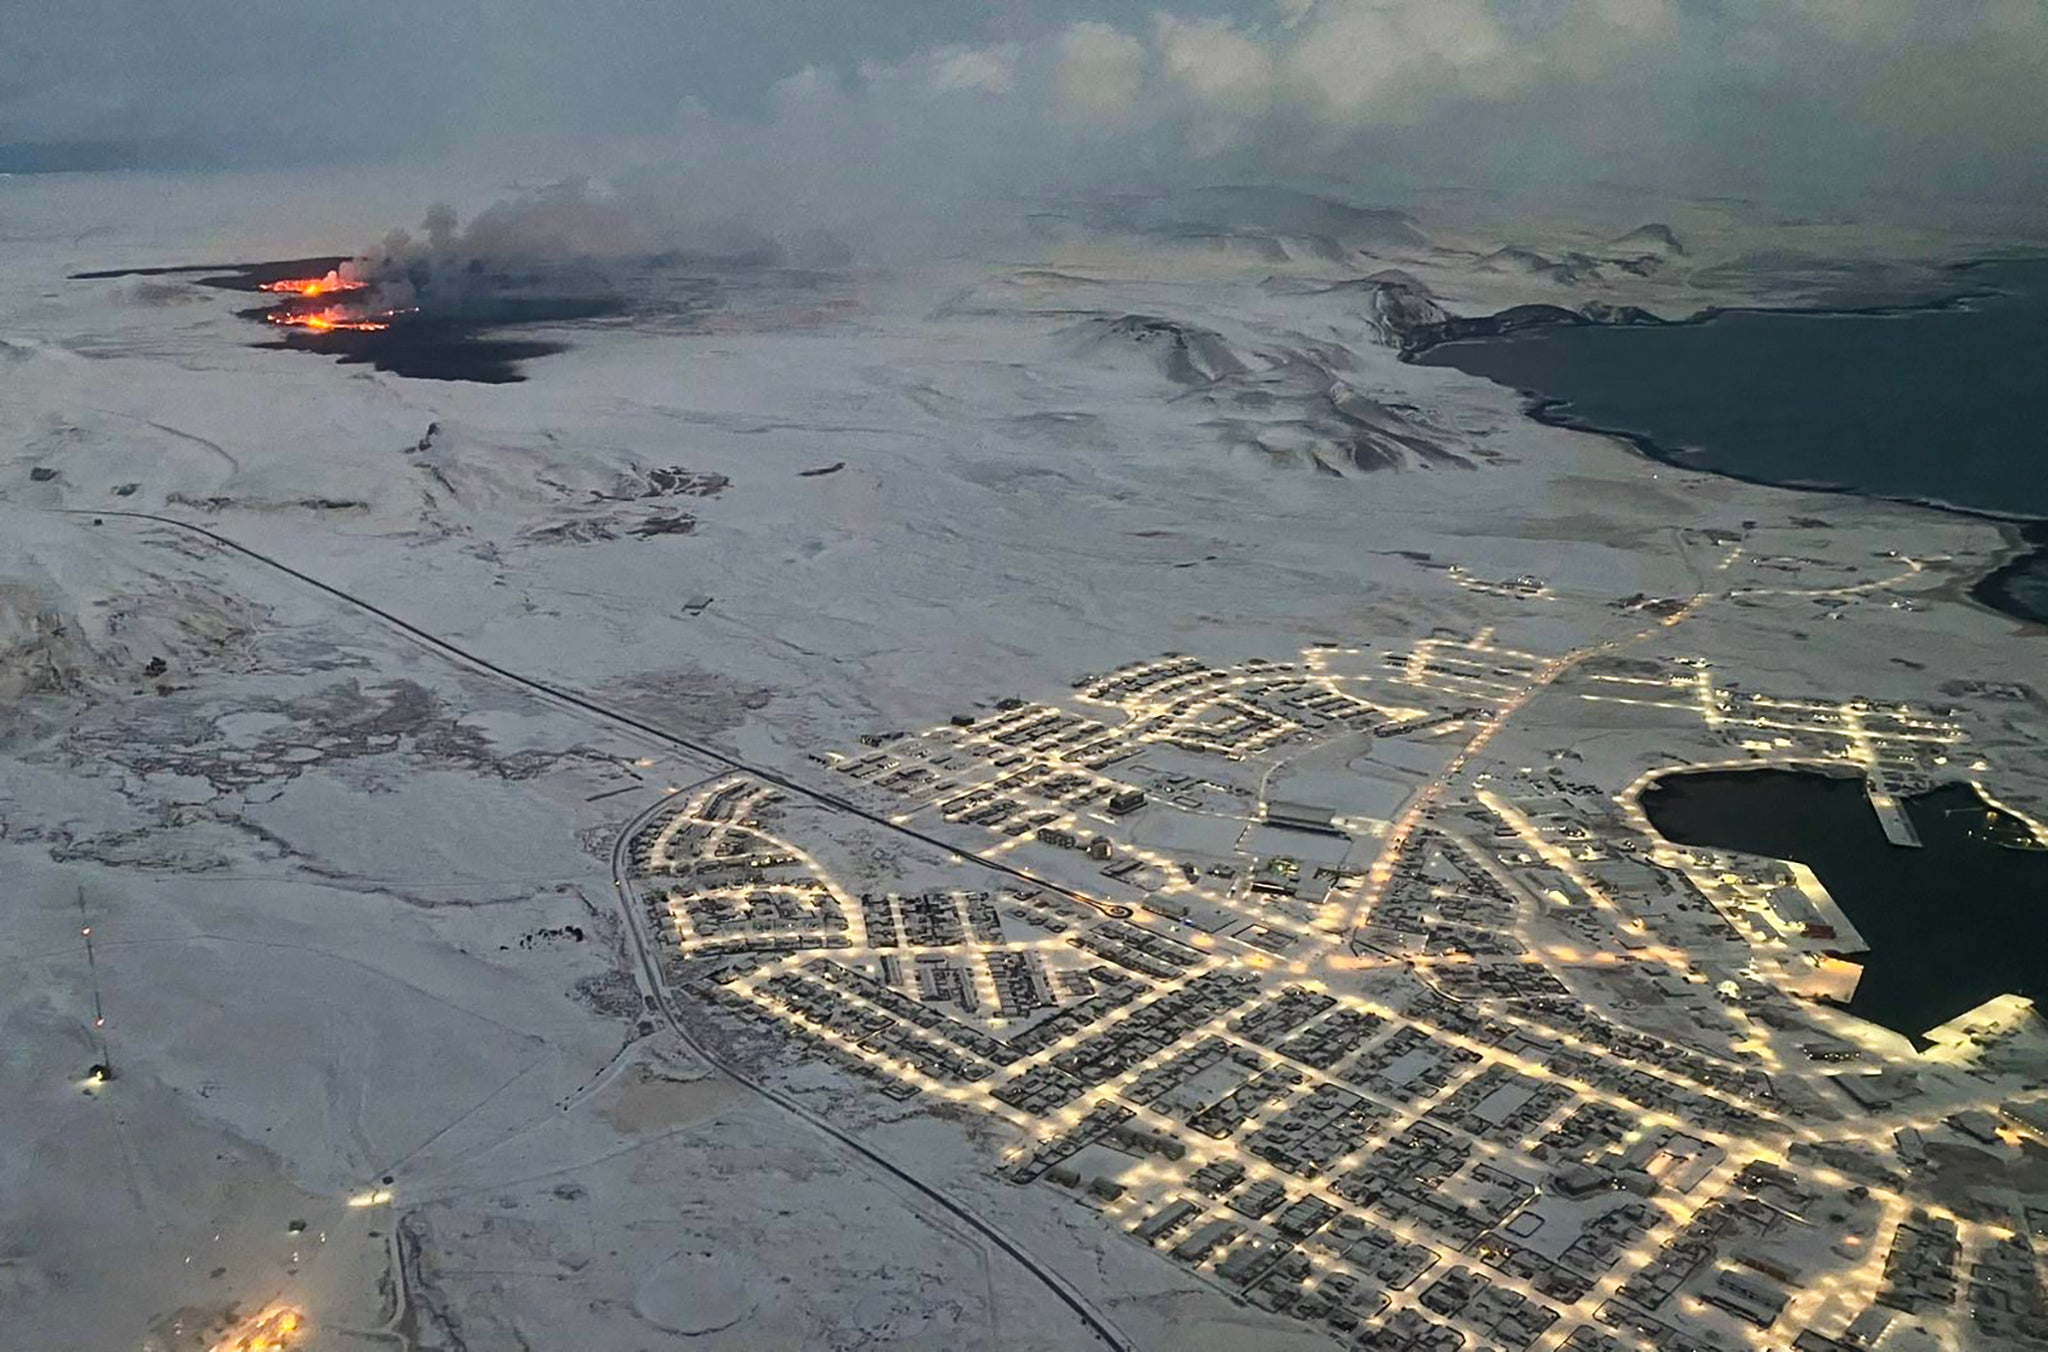 The evacuated Icelandic town of Grindavik (R) is seen as smoke billow and lava is thrown into the air from a fissure